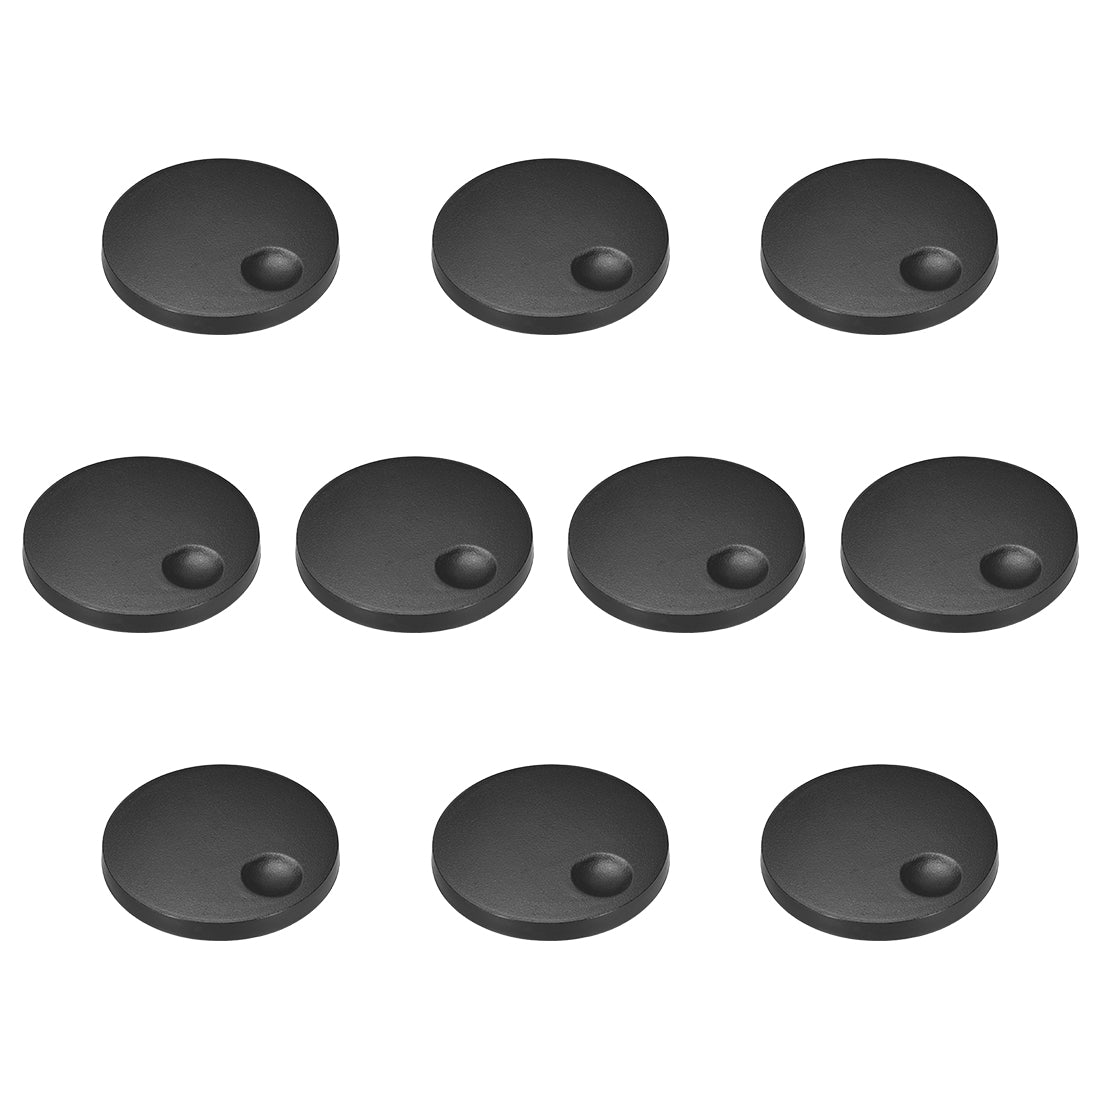 uxcell Uxcell 10pcs, Potentiometer Control Knobs For Encoder Code Switch Knobs Acrylic Volume Tone Knobs Black  D type 6mm